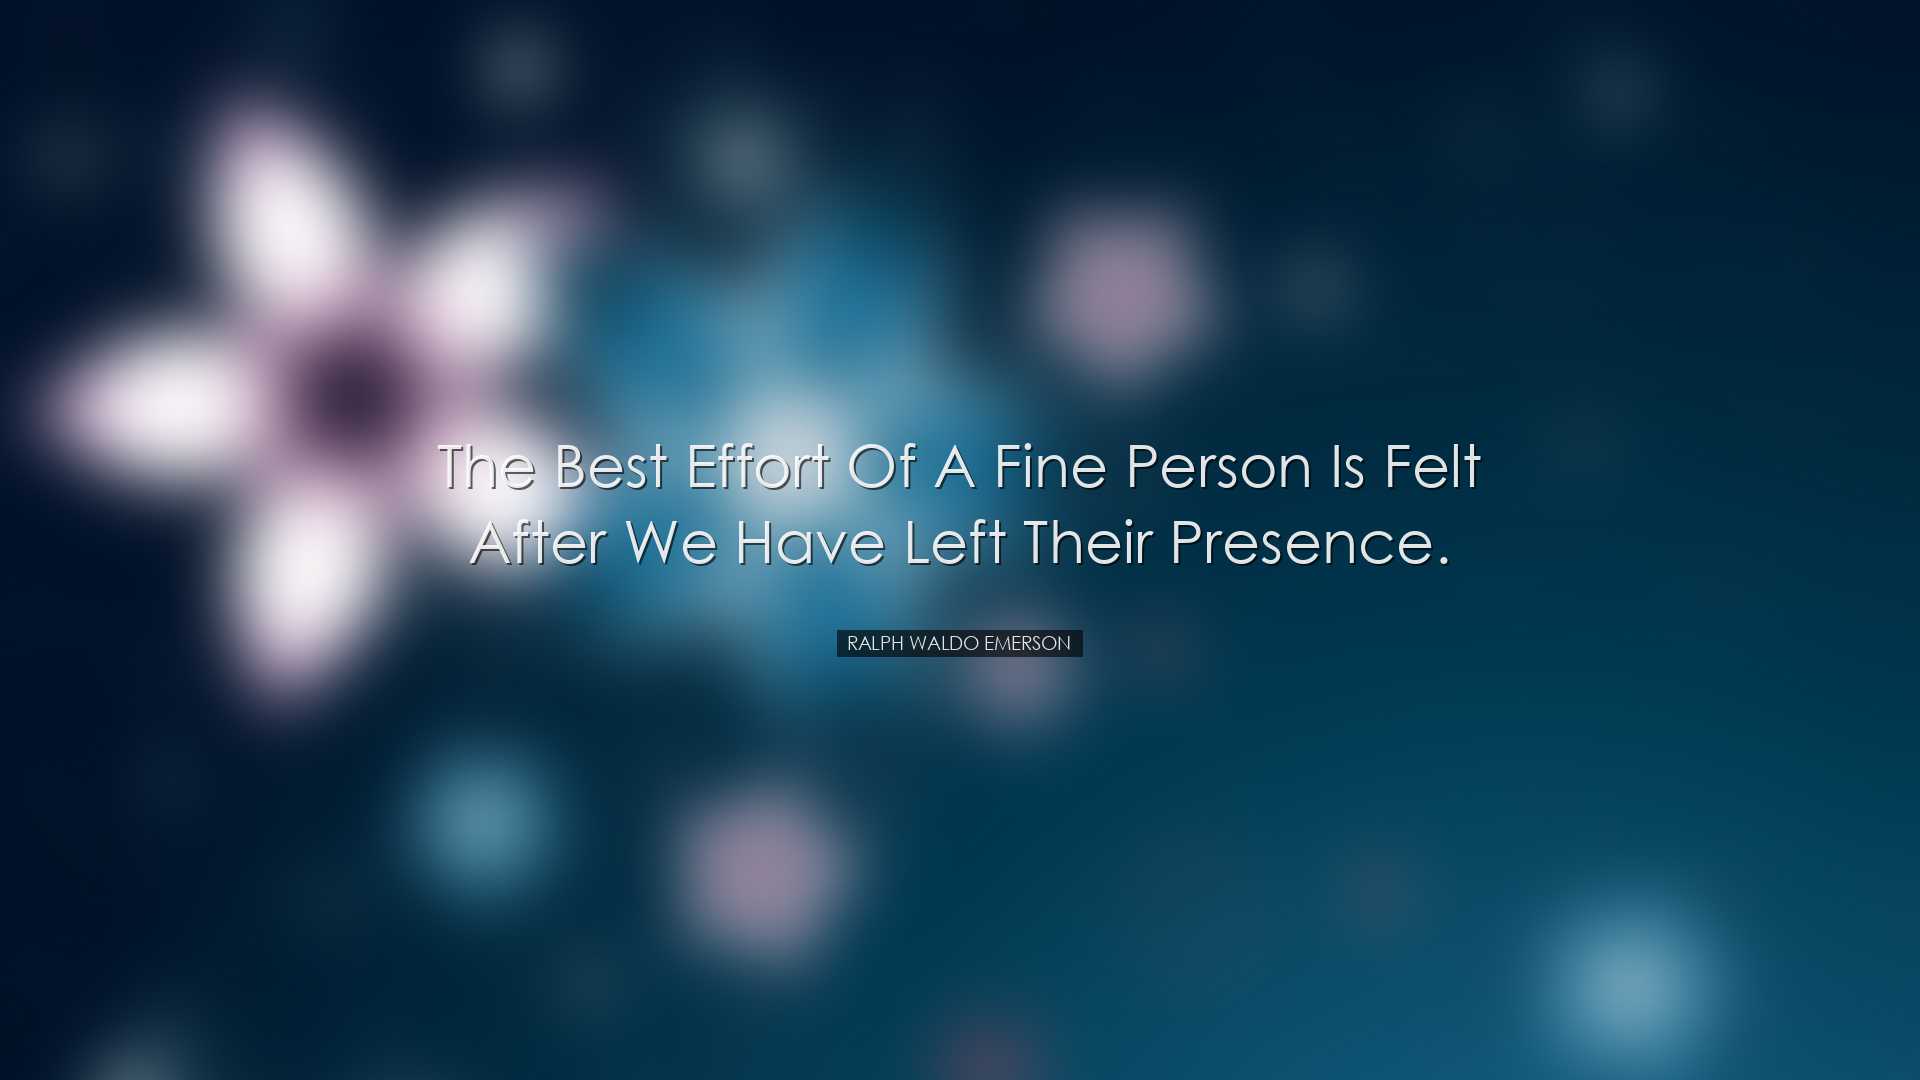 The best effort of a fine person is felt after we have left their